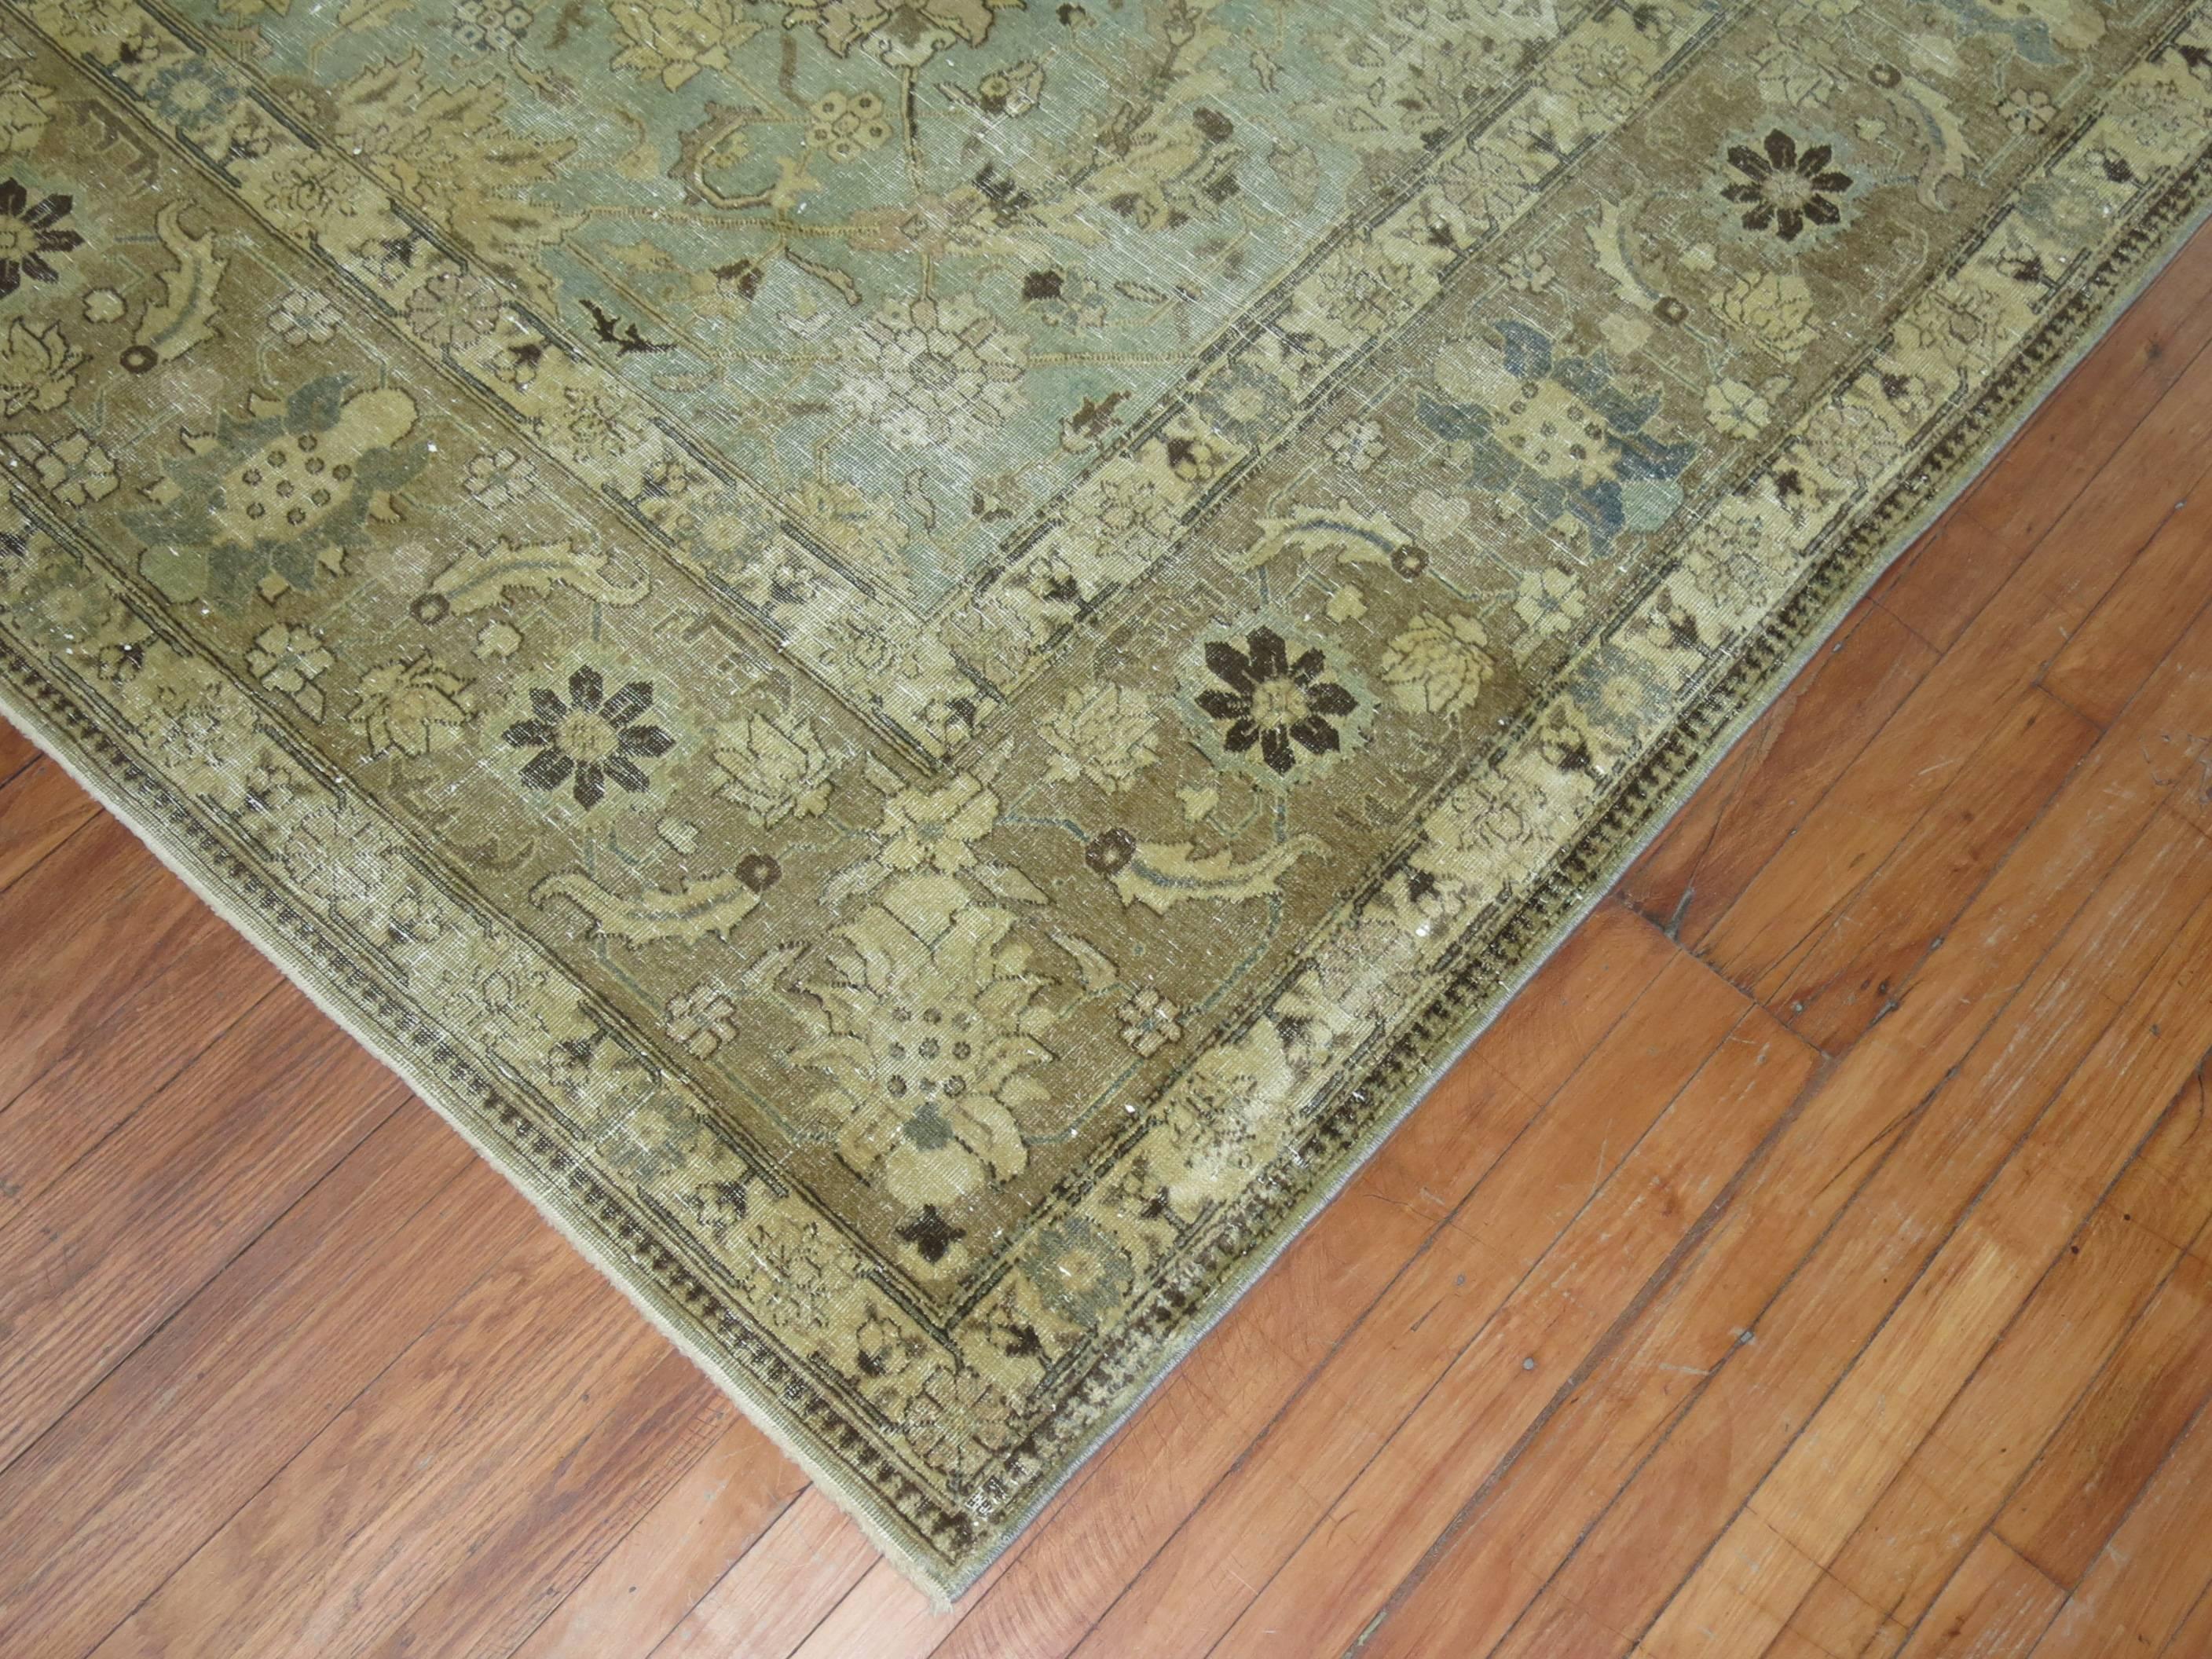 An early 20th century Distressed Persian Tabriz carpet in mint green. Light brown border with some khaki and slate accents

9'5'' x 12'9''